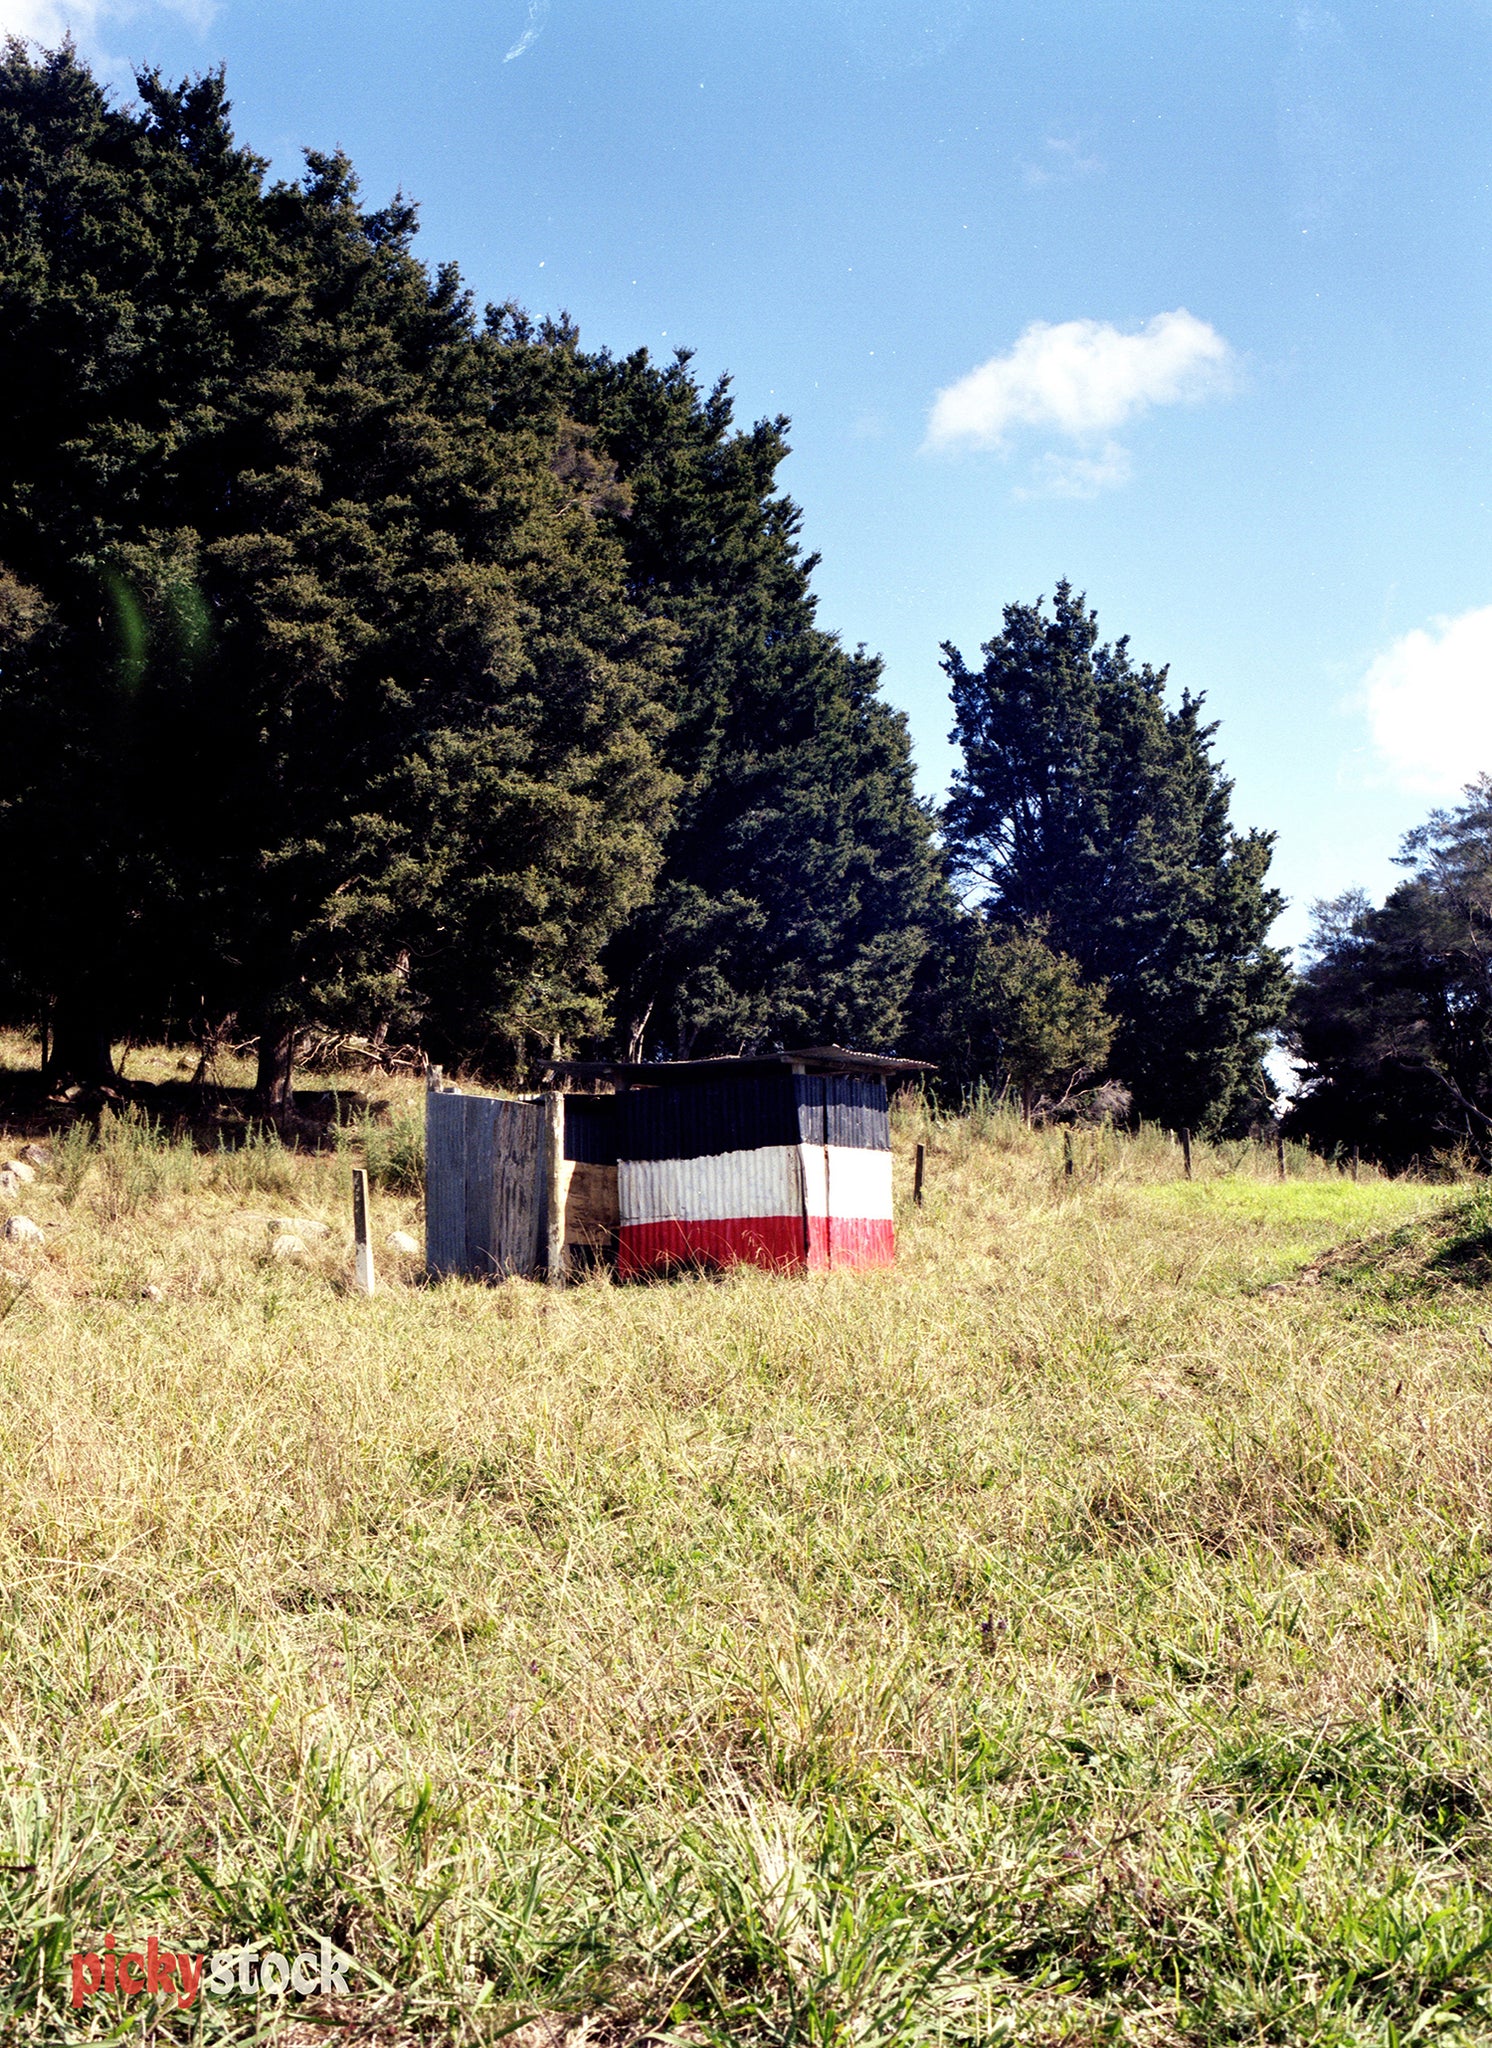 Colourful red, white and navy tin shed against the hills.